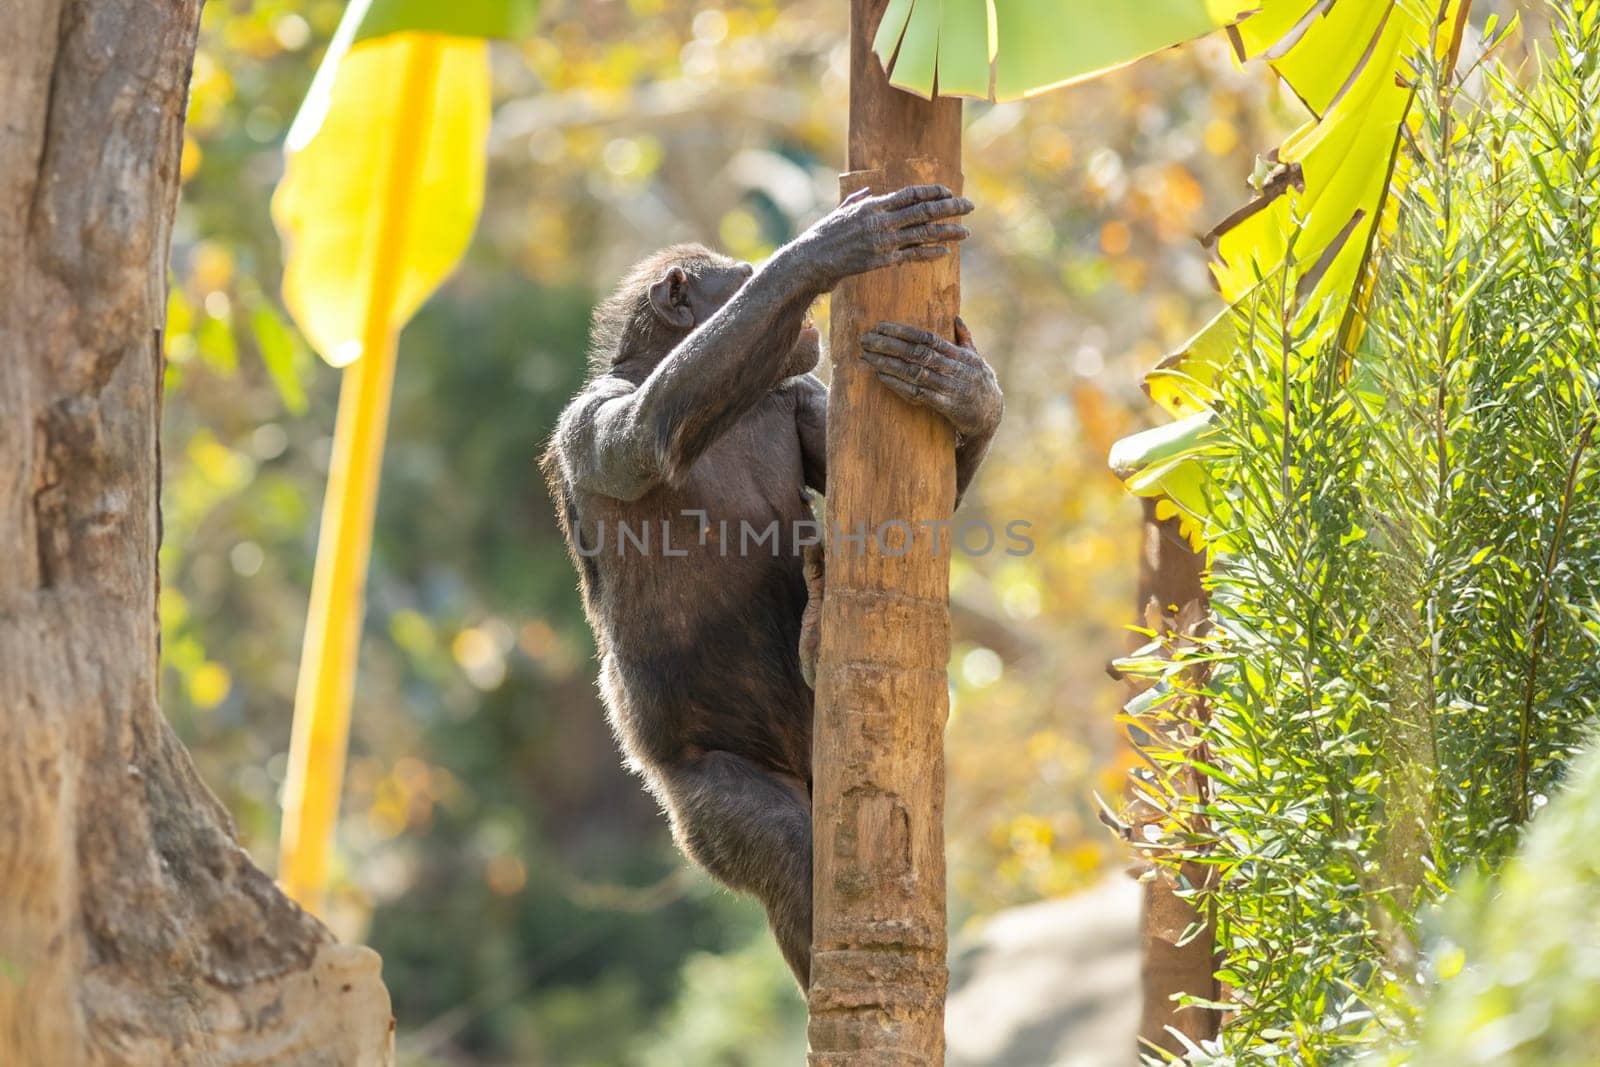 Monkey Business: An Agile Primate Ascending a Tall Tree by Studia72